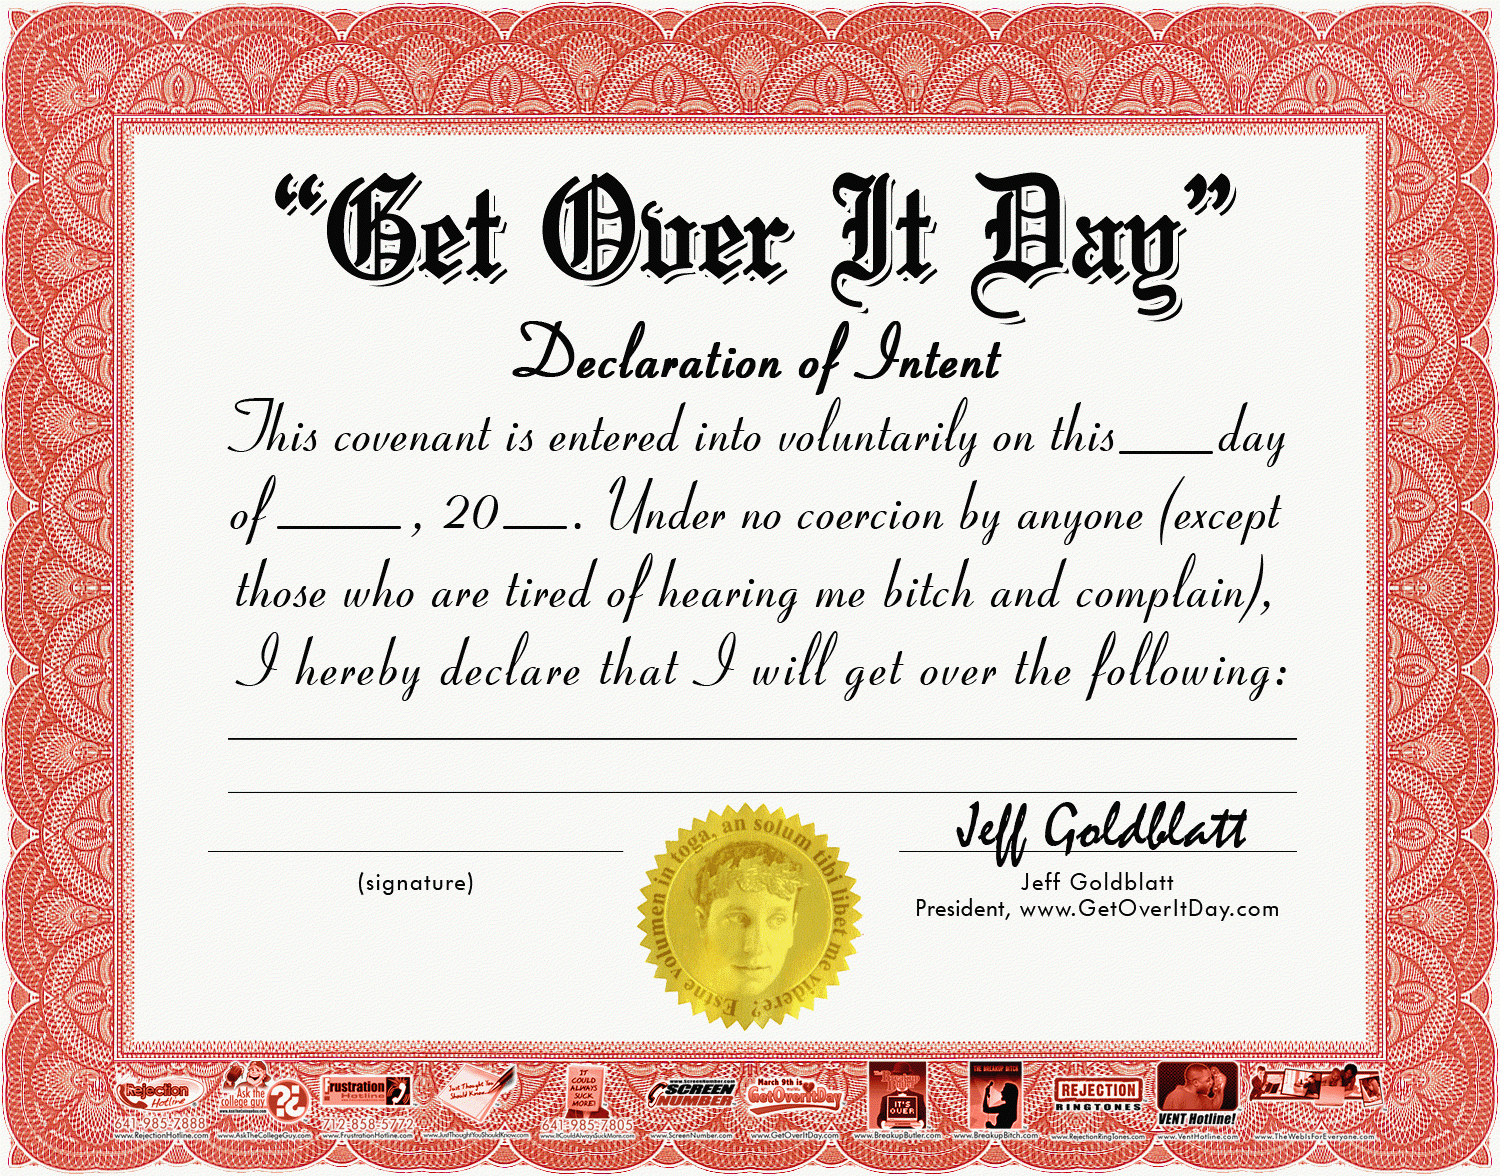 Funny Office Awards Youtube. Silly Certificates Funny Awards Regarding Free Printable Funny Certificate Templates